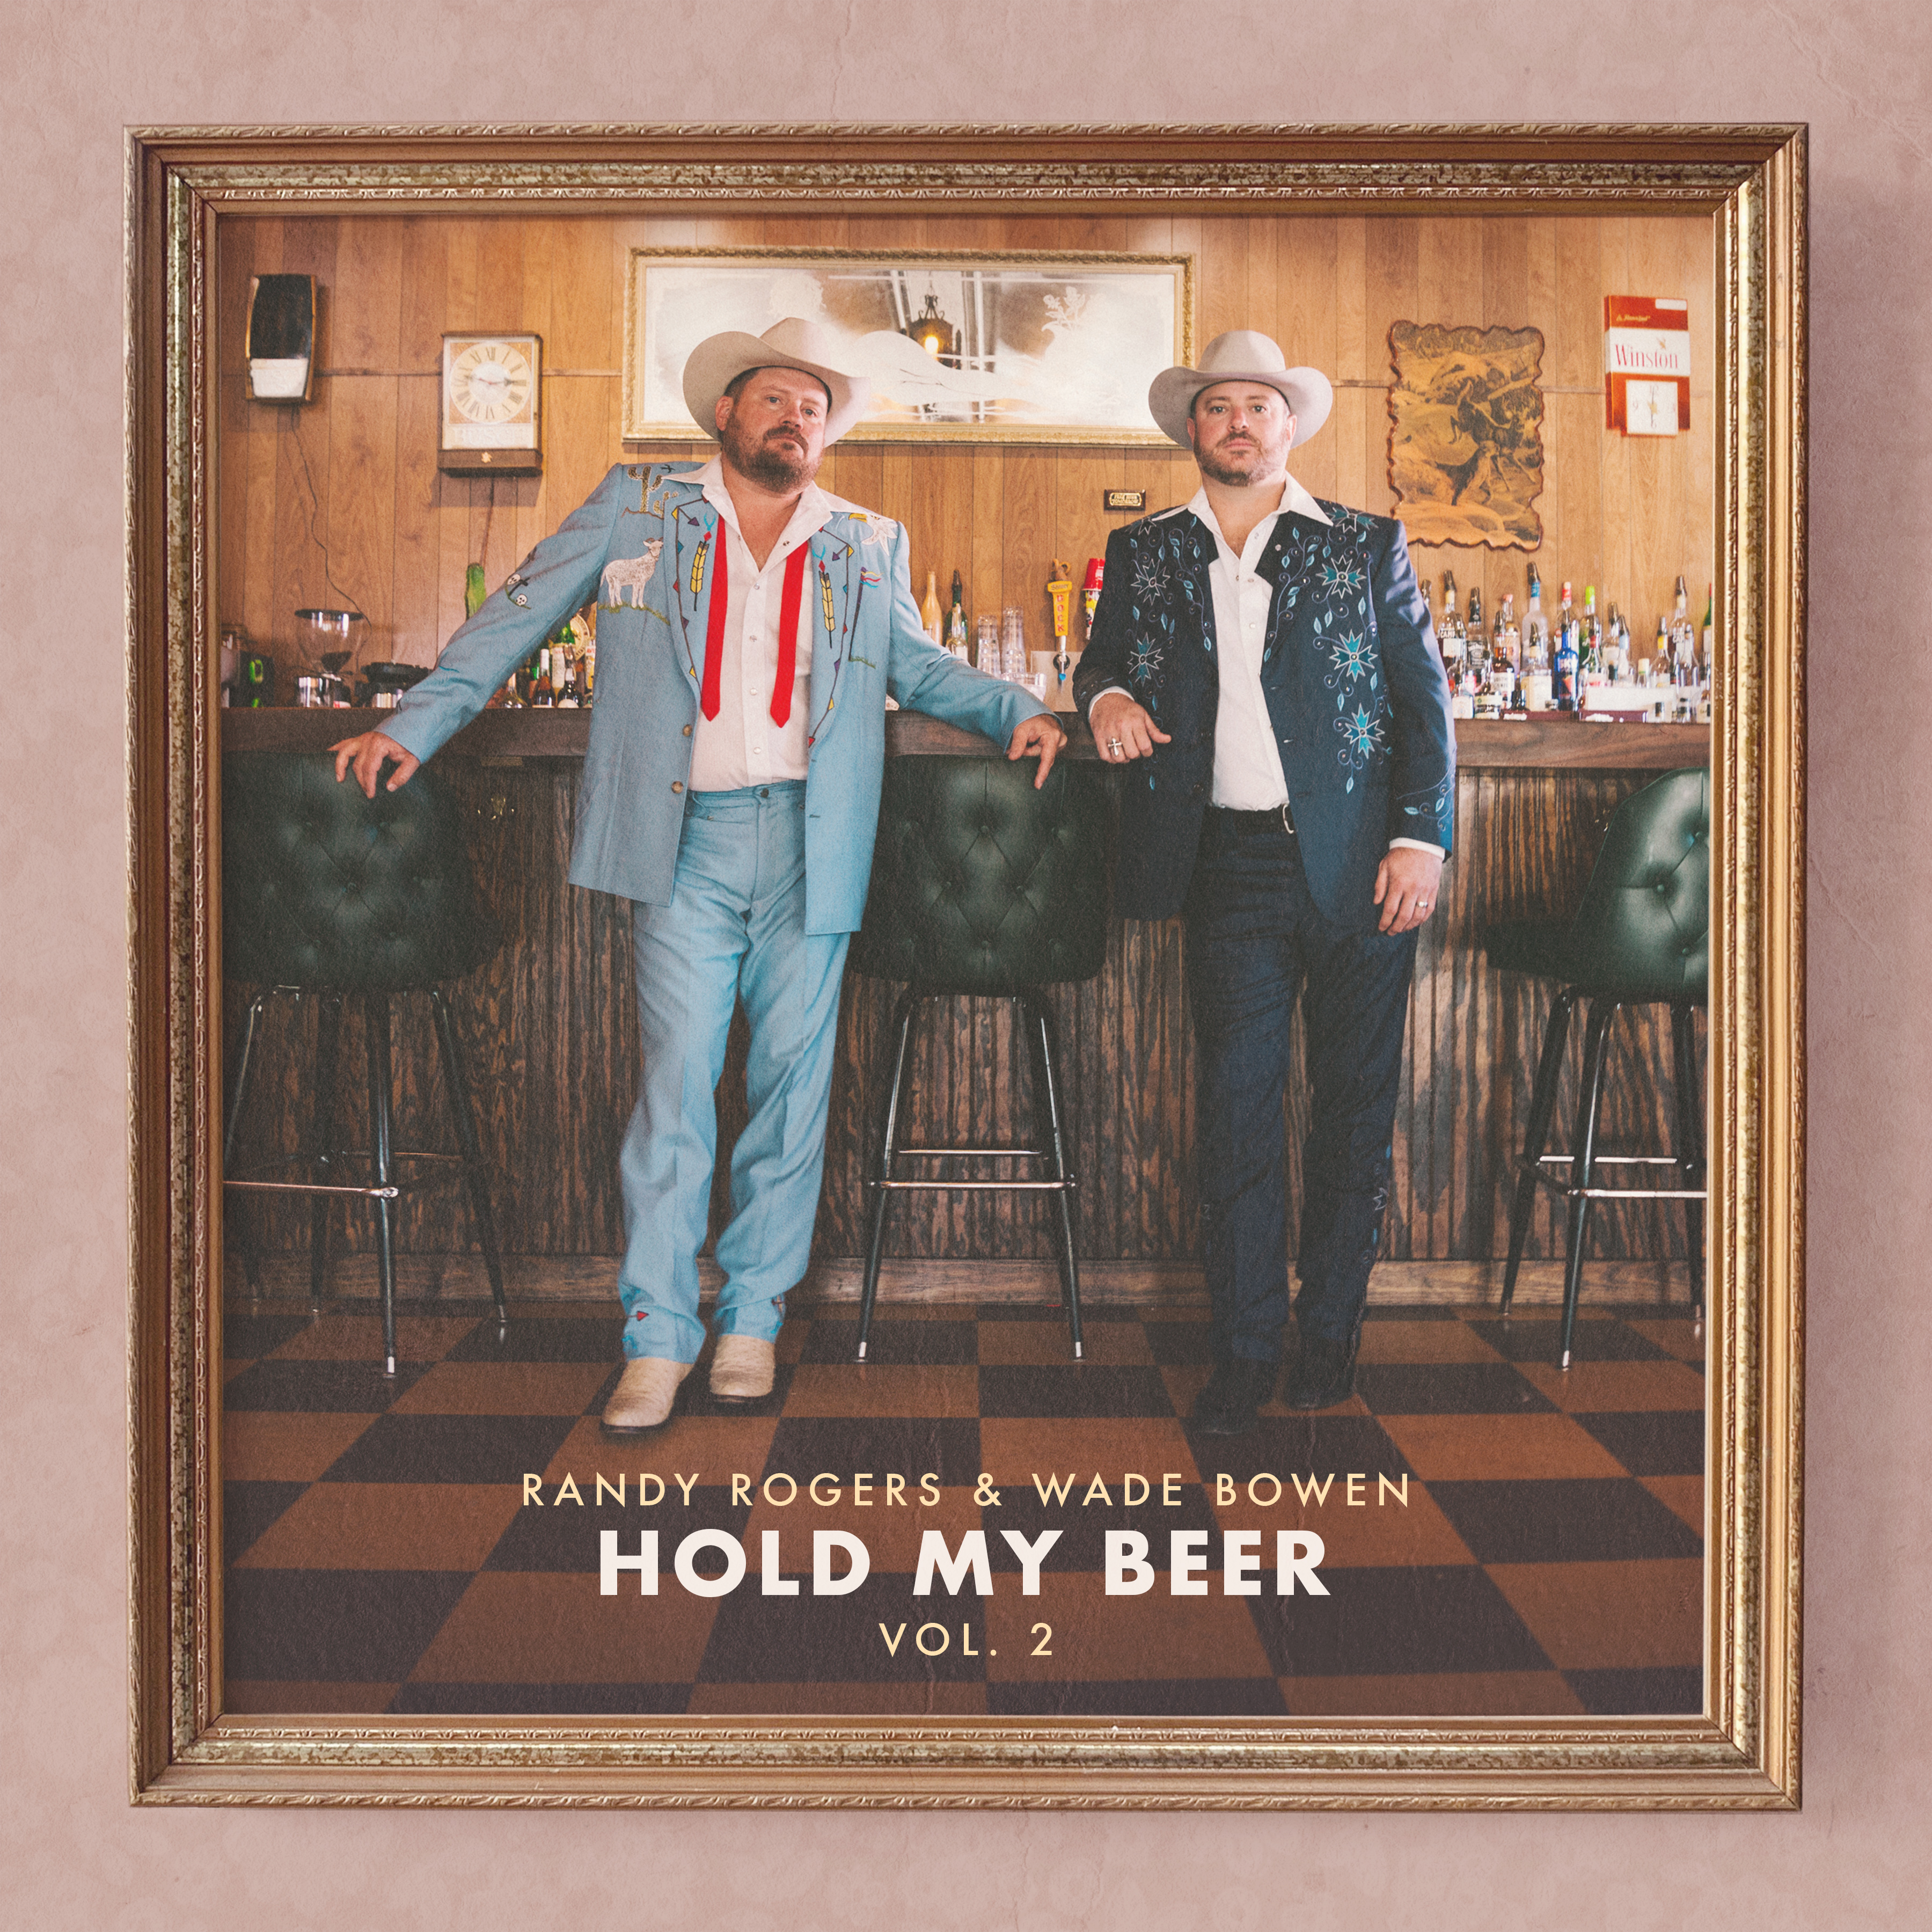 Art for Hold My Beer by Randy Rogers & Wade Bowen